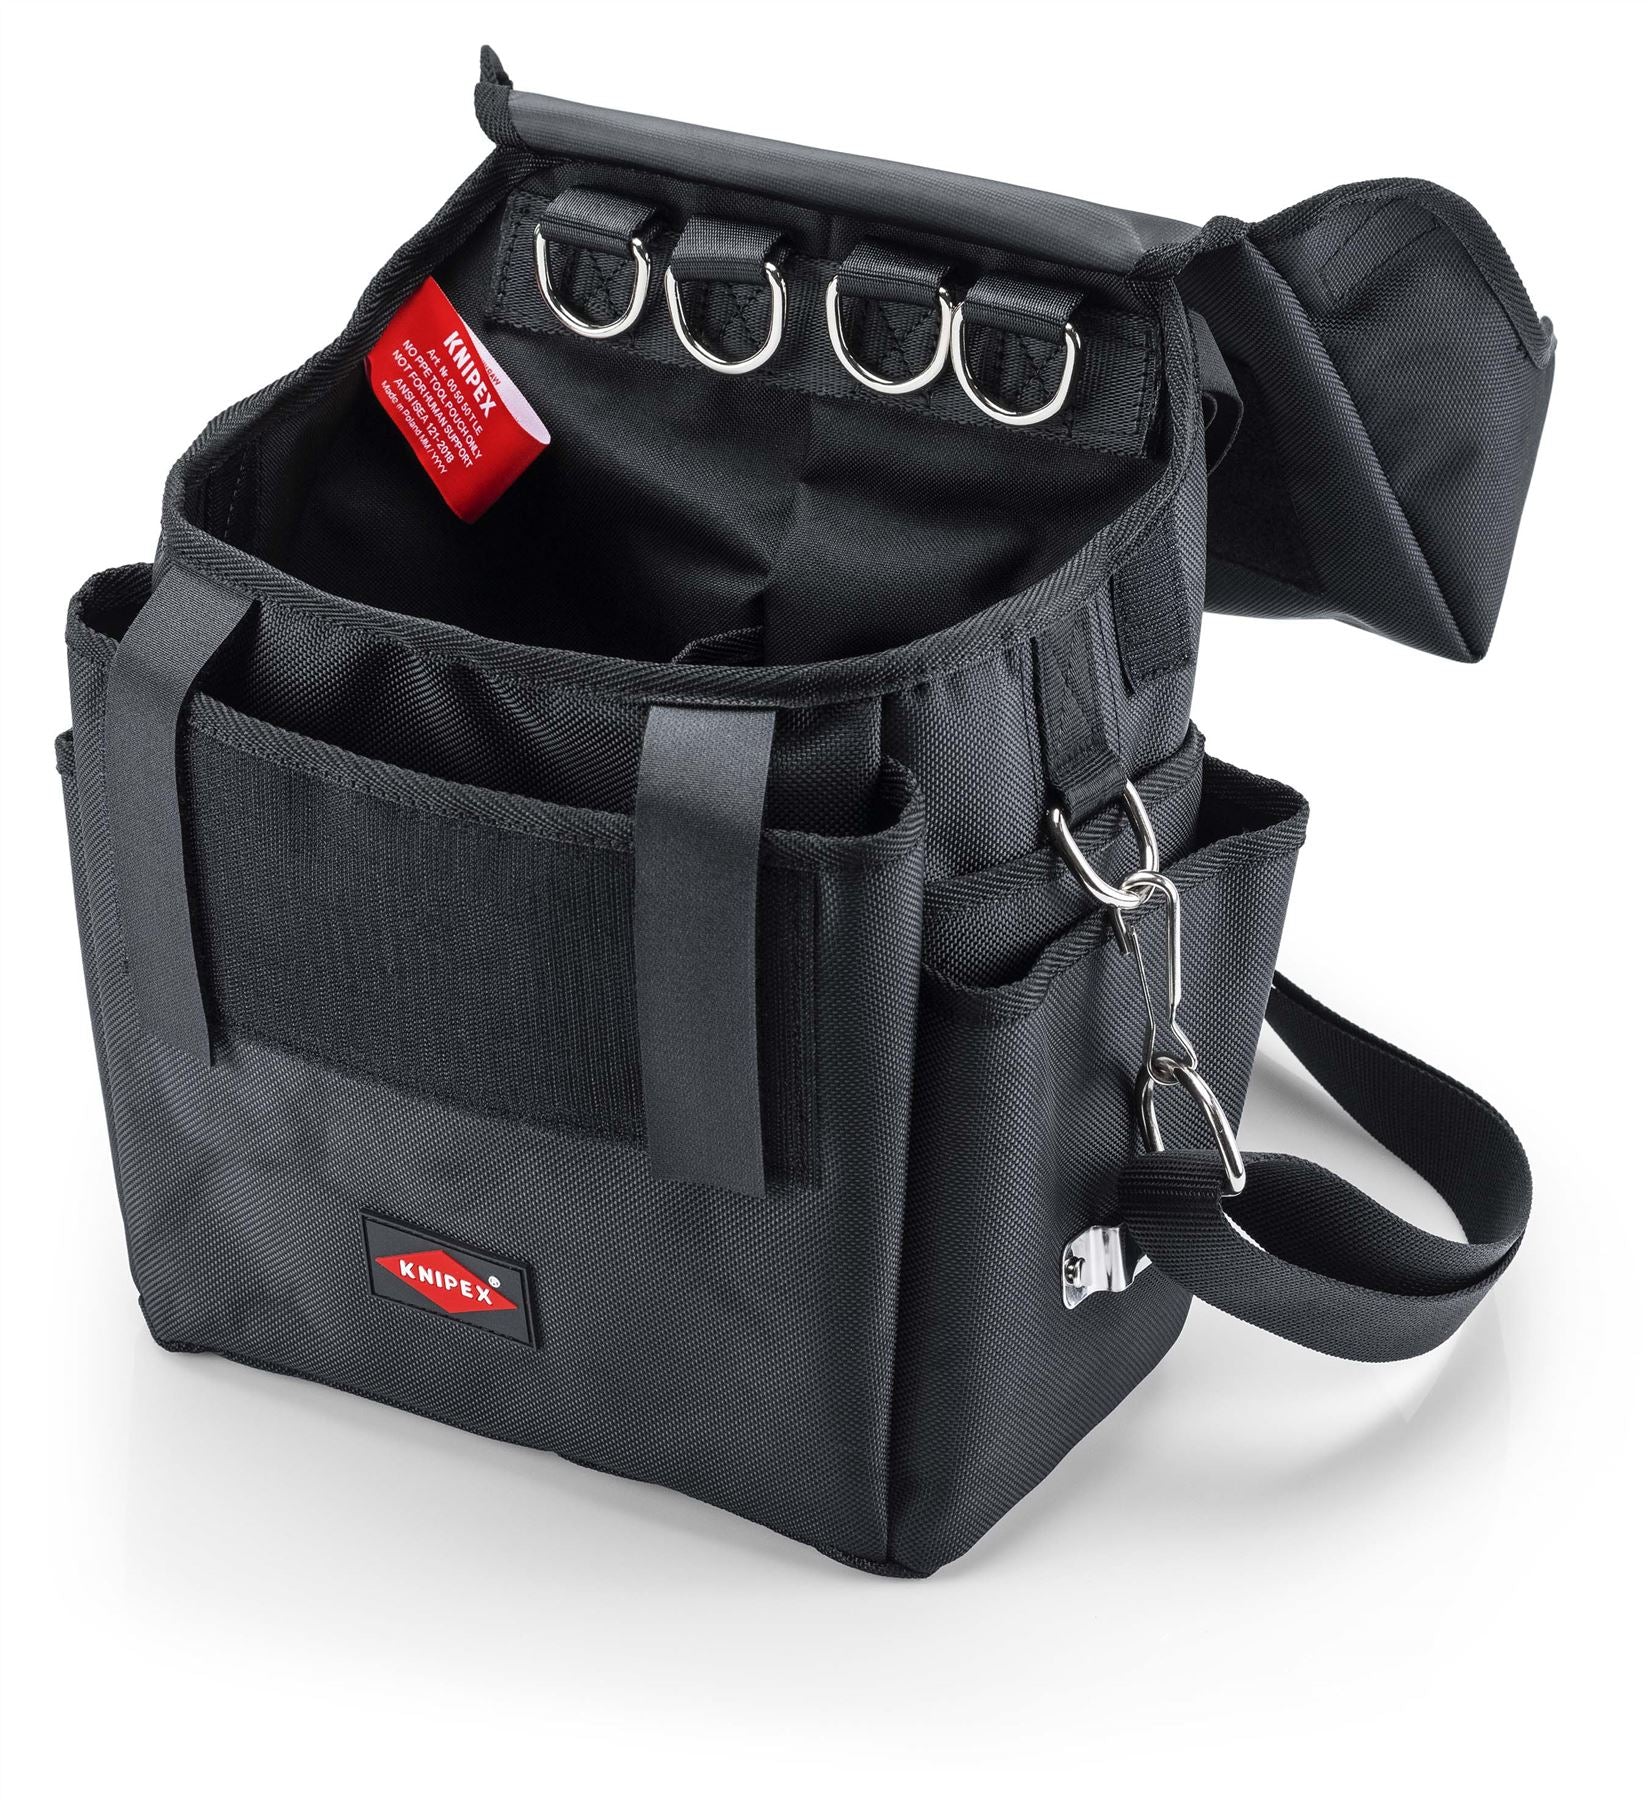 Knipex Tool Bag Case for Working at Heights Small 370 x 250 x 150mm 00